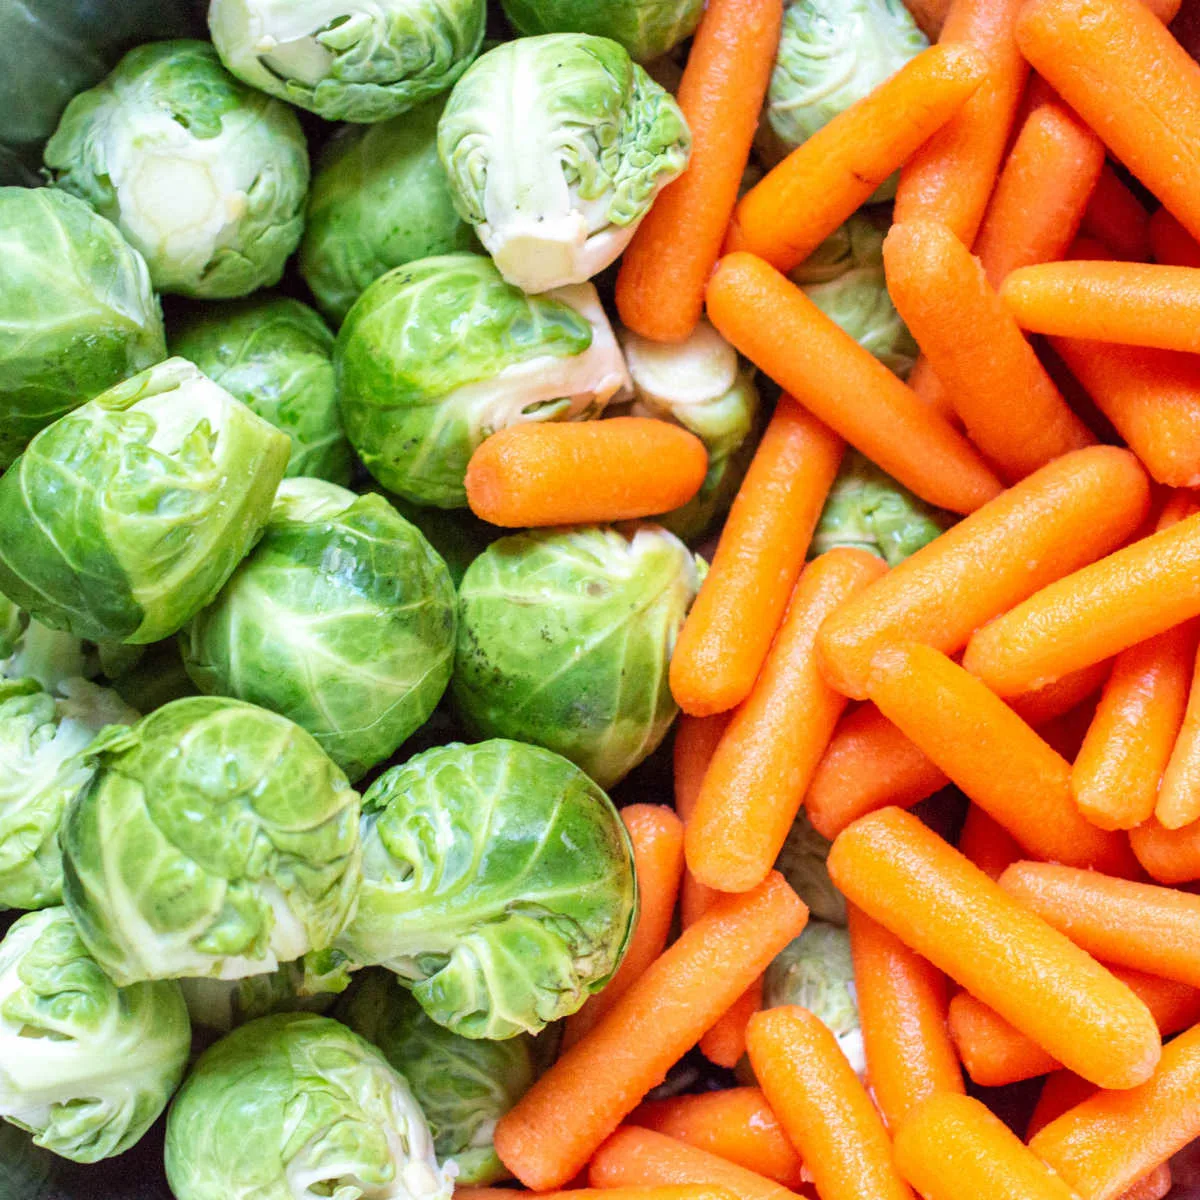 fresh Brussels sprouts and carrots next to each other.